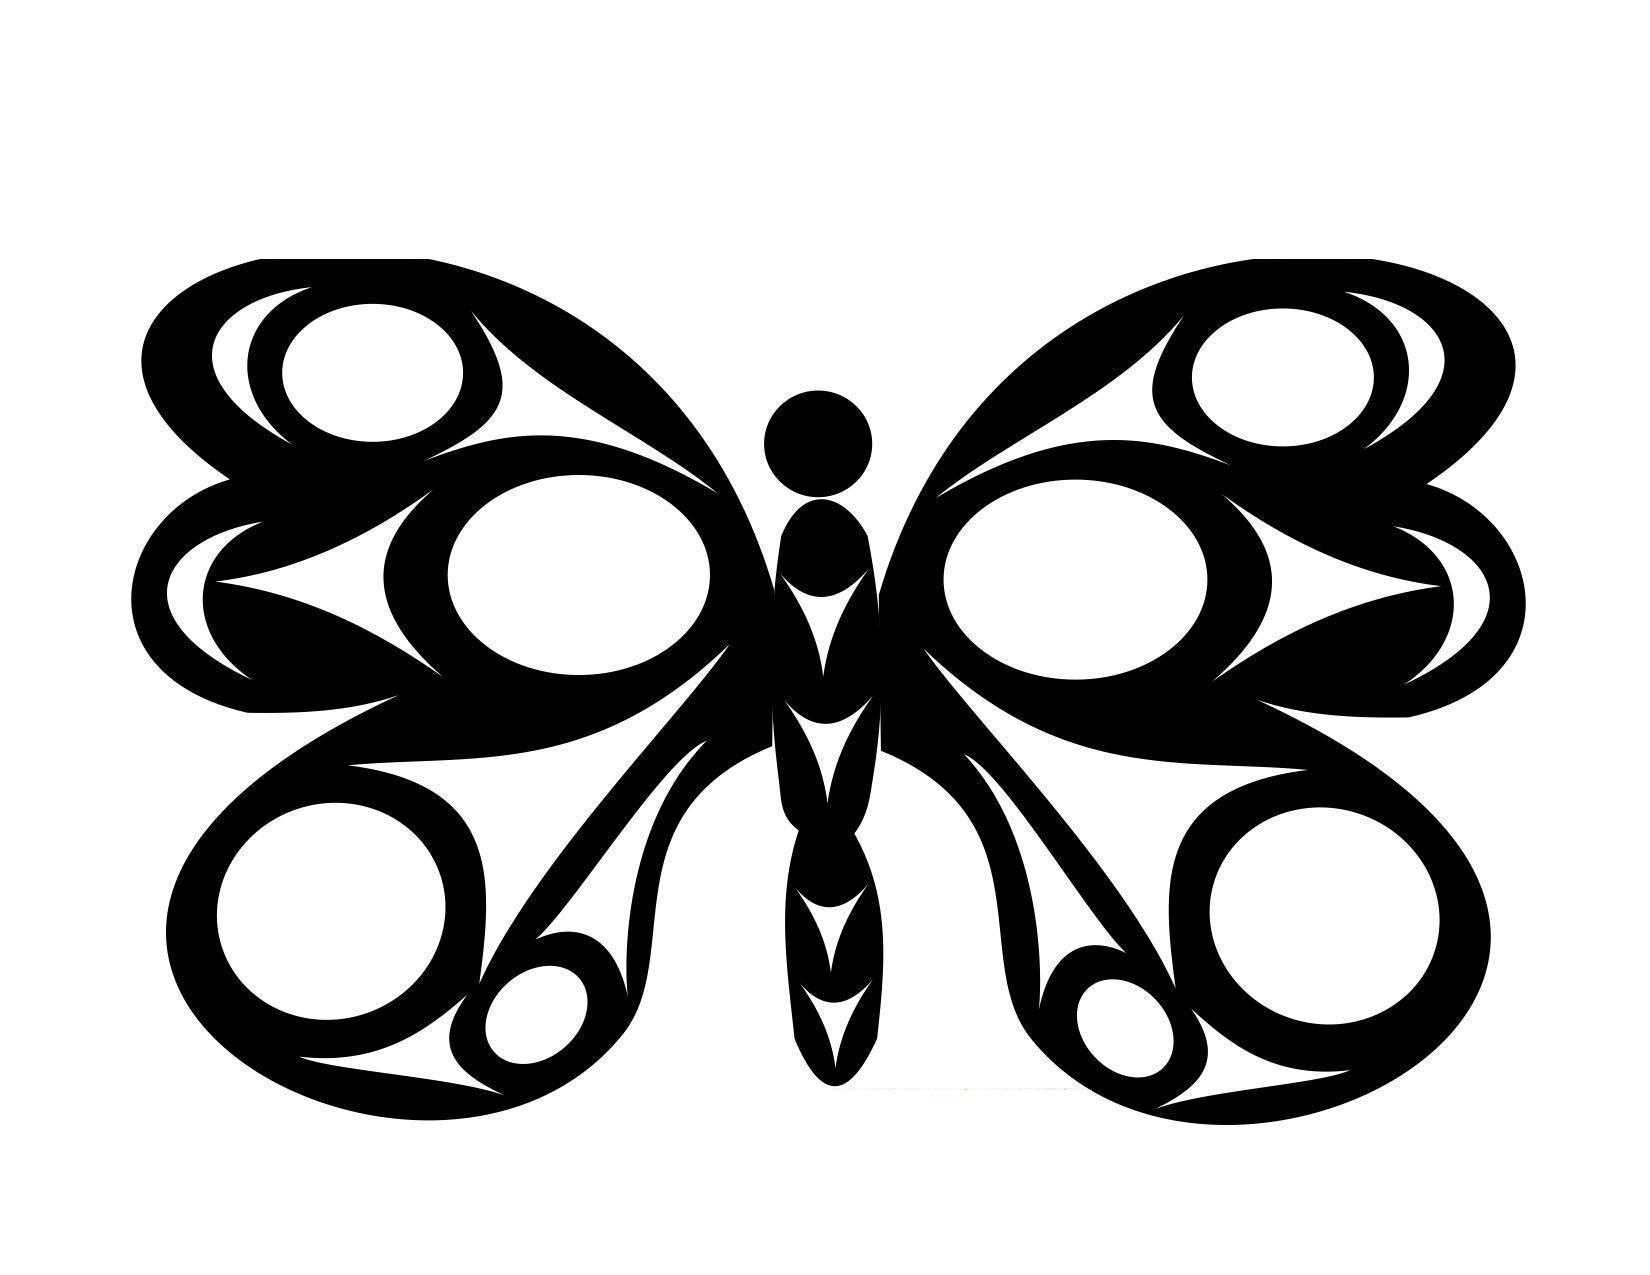 Coloring Butterfly patterns. Category Insects. Tags:  butterfly.